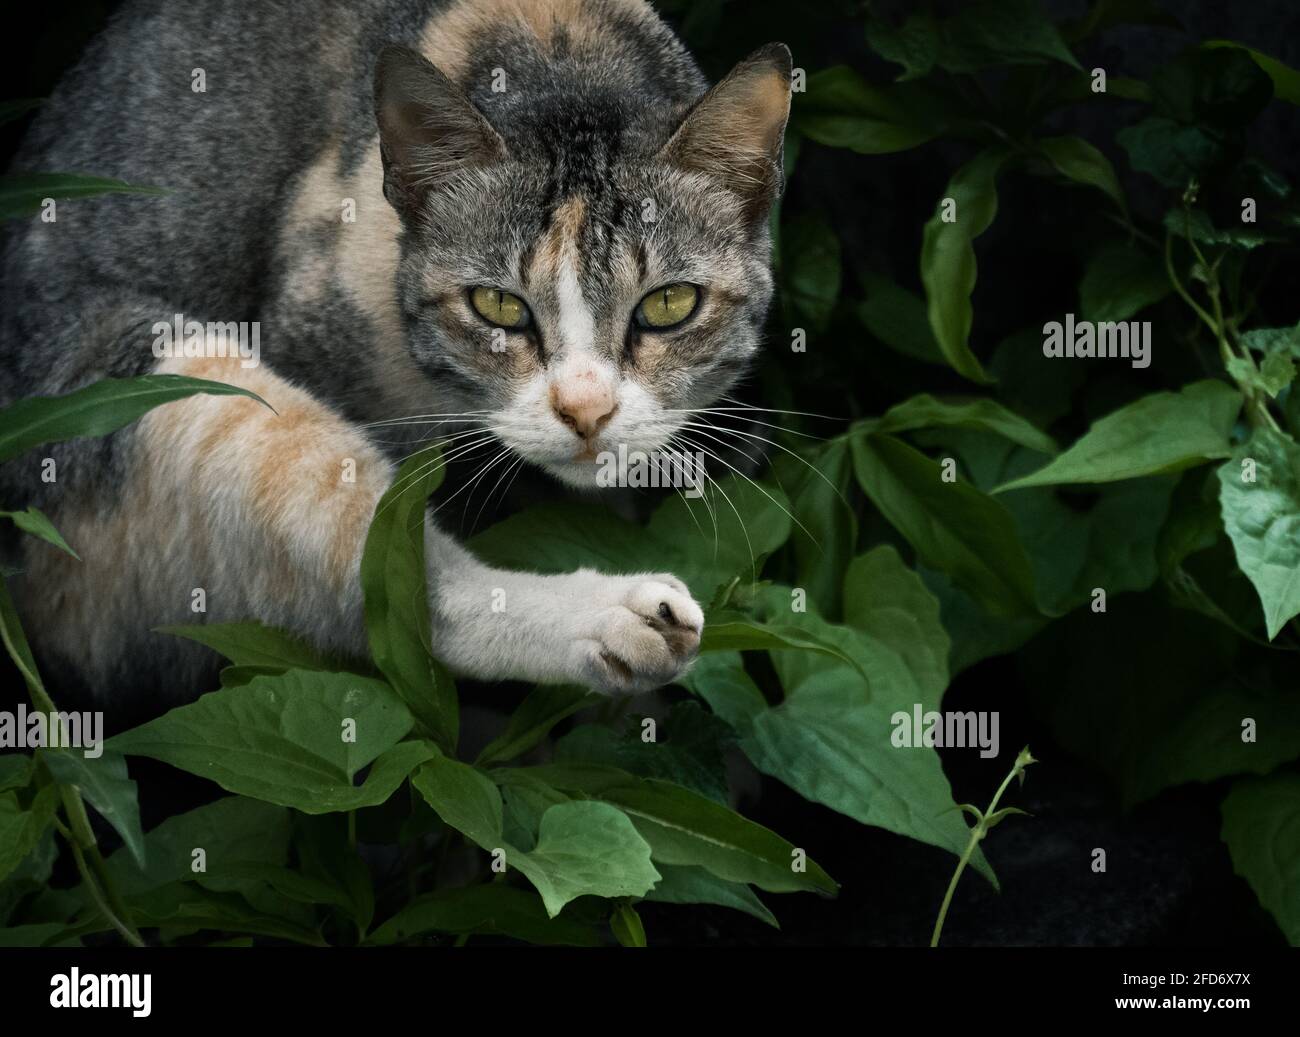 Cat ready to jump at any time, focused eyes looking front with serious facial expression. Stock Photo